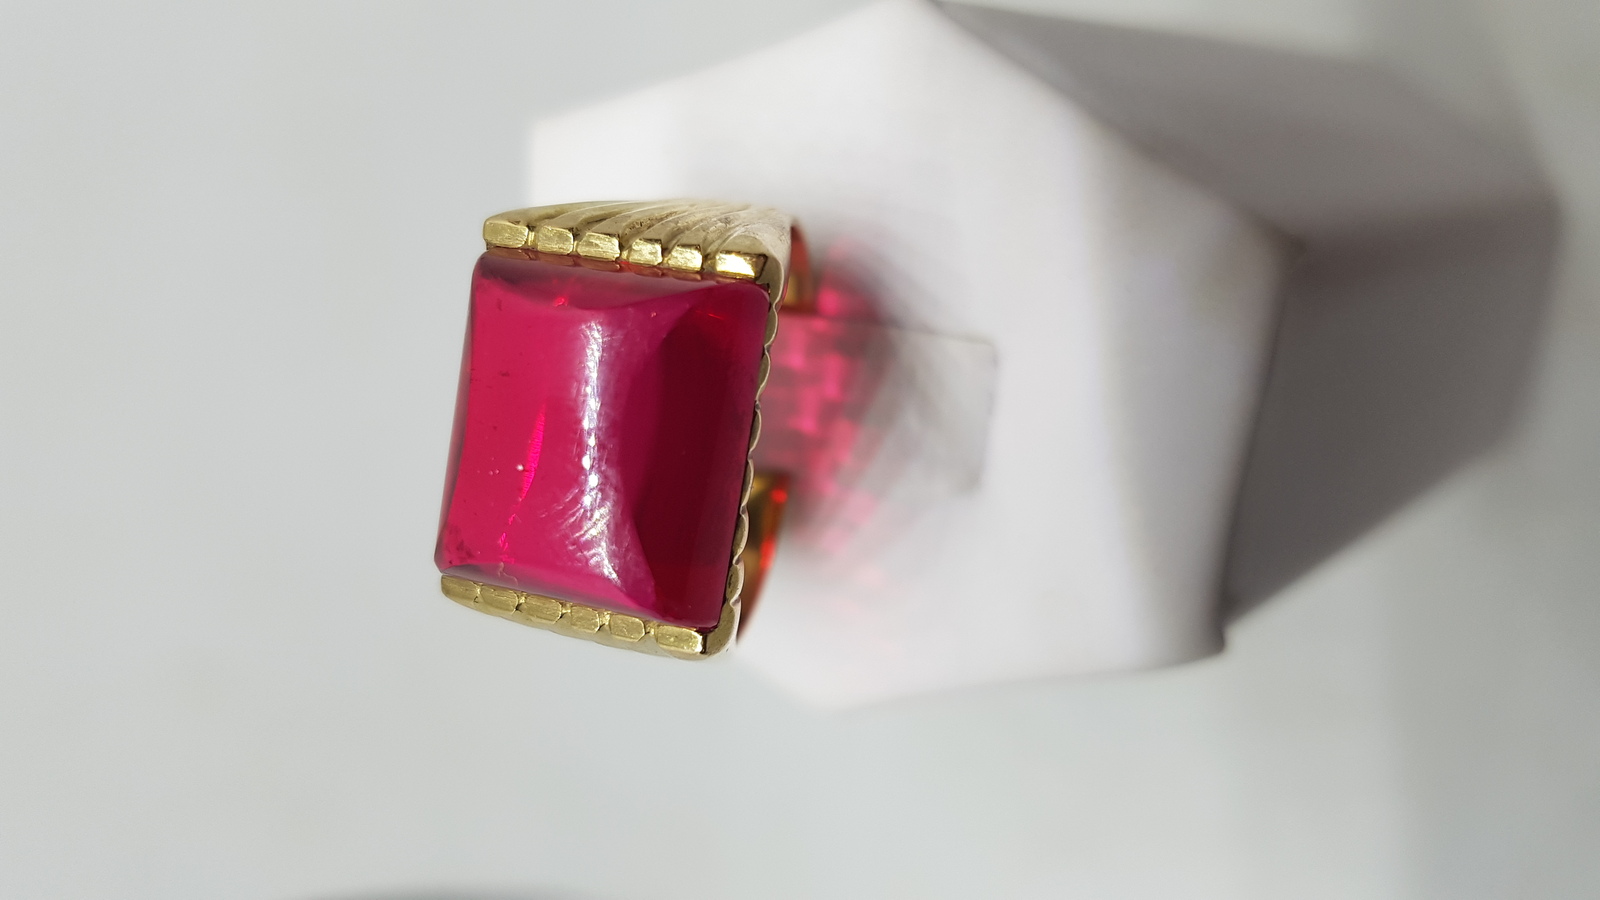 9ct Gold Signet Ring Set With Large Ruby Stone